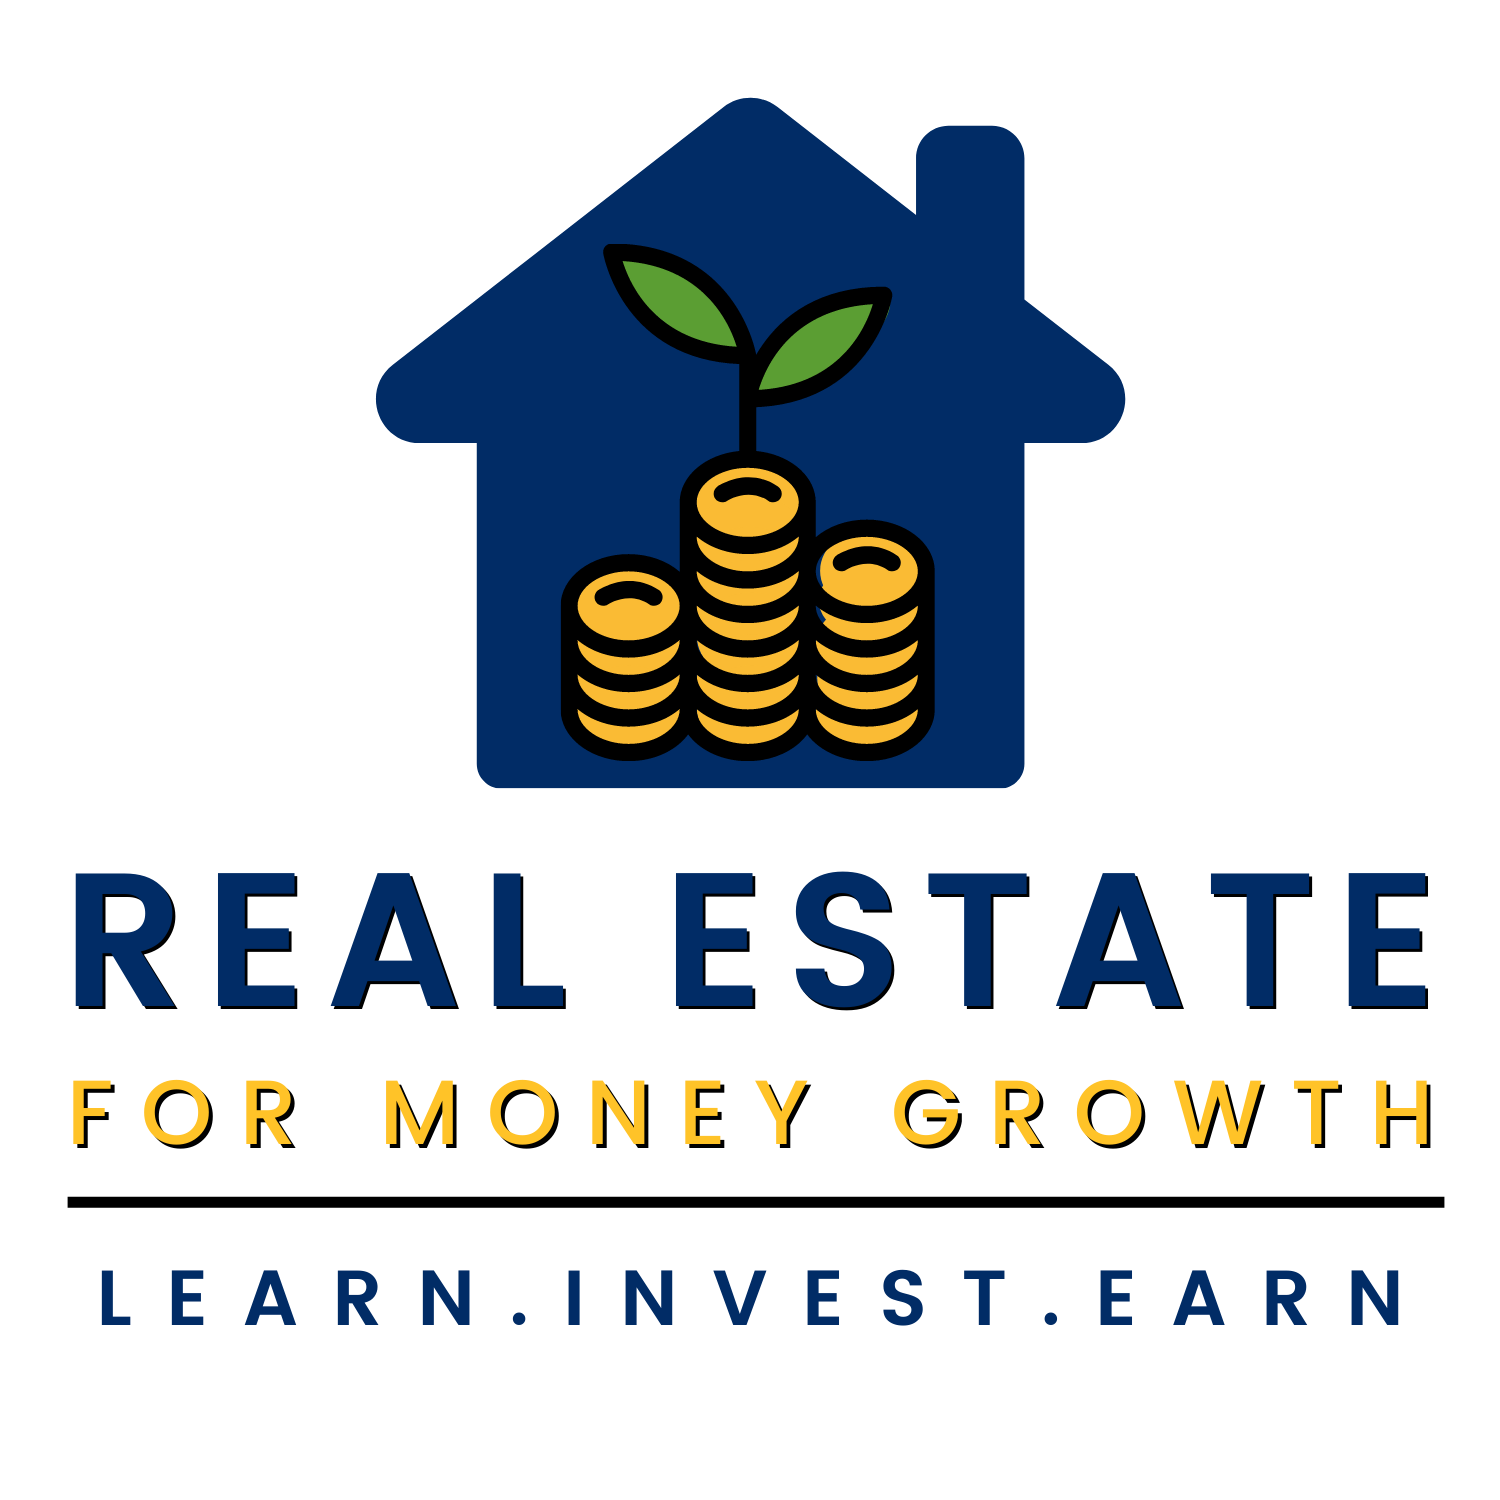 Real Estate For Money Growth